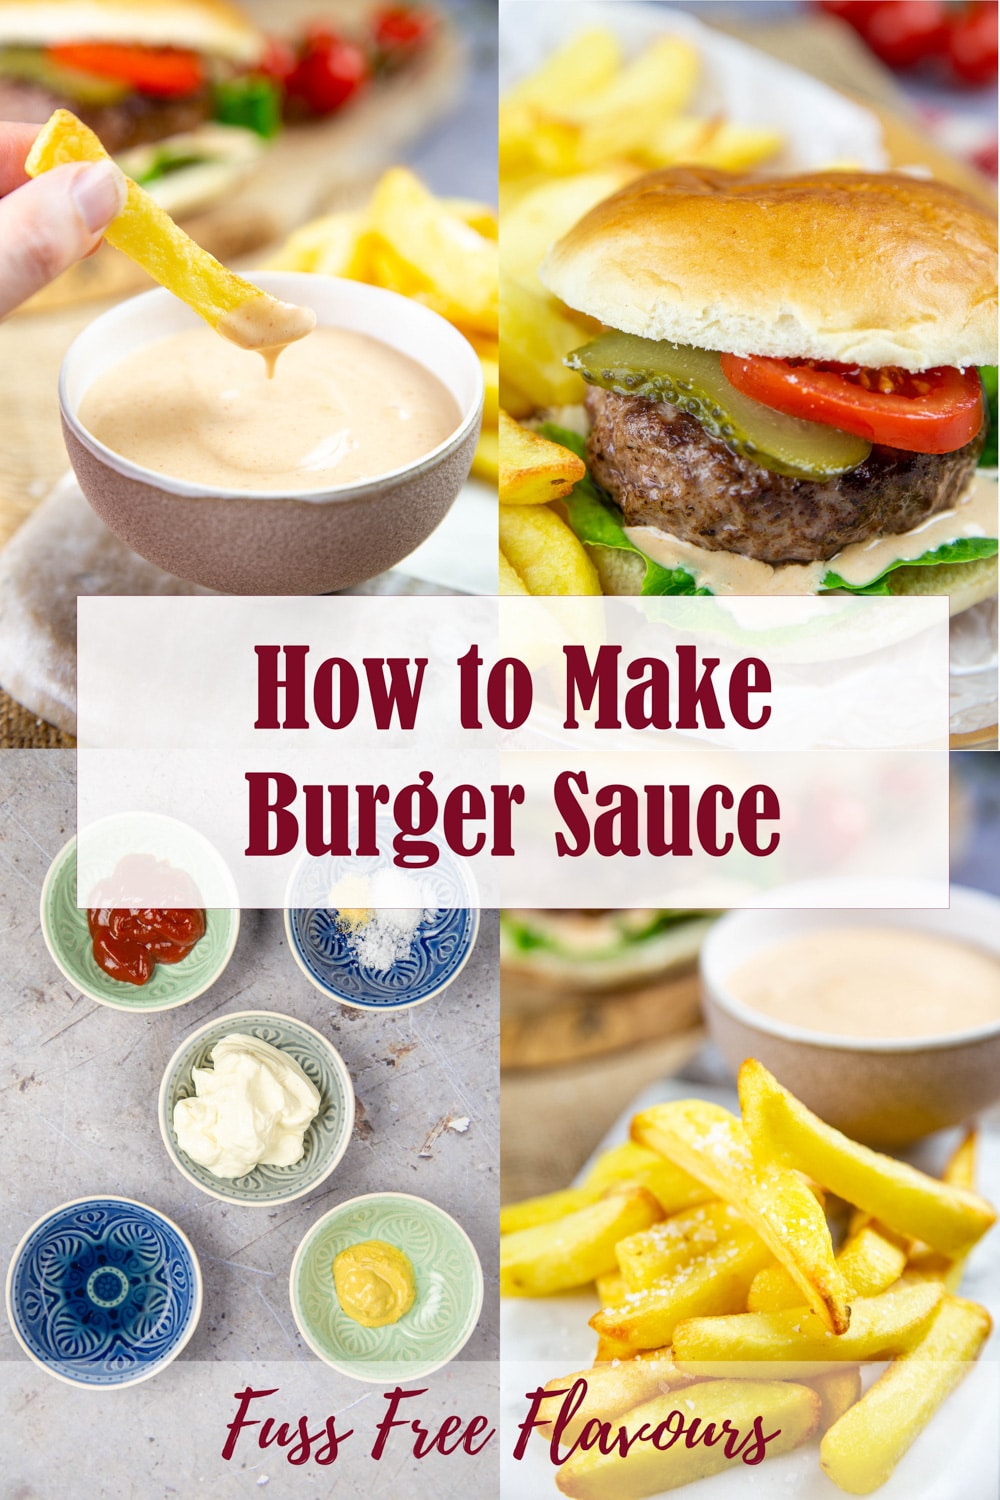 Easy Burger Sauce Recipe (no fancy ingredients) - Fuss Free Flavours